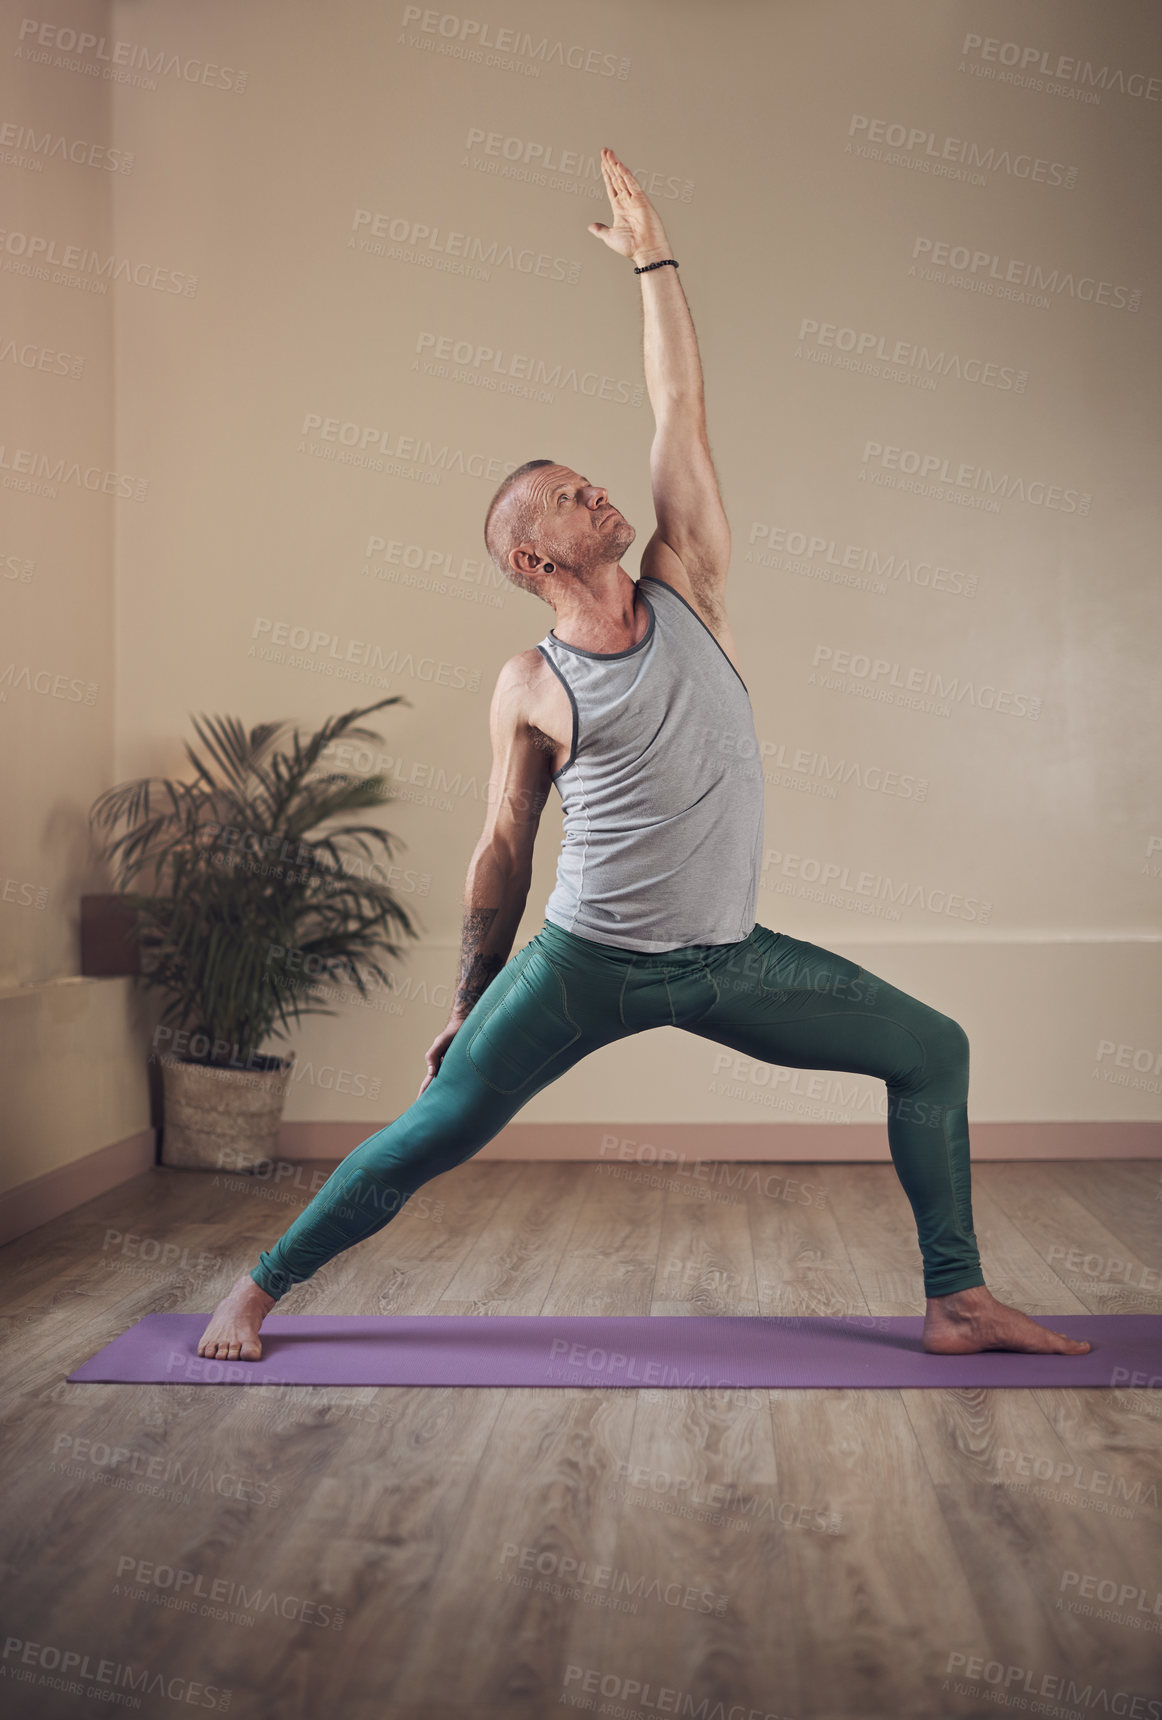 Buy stock photo Full length shot of a handsome young man standing and holding a yoga pose during an indoor session alone